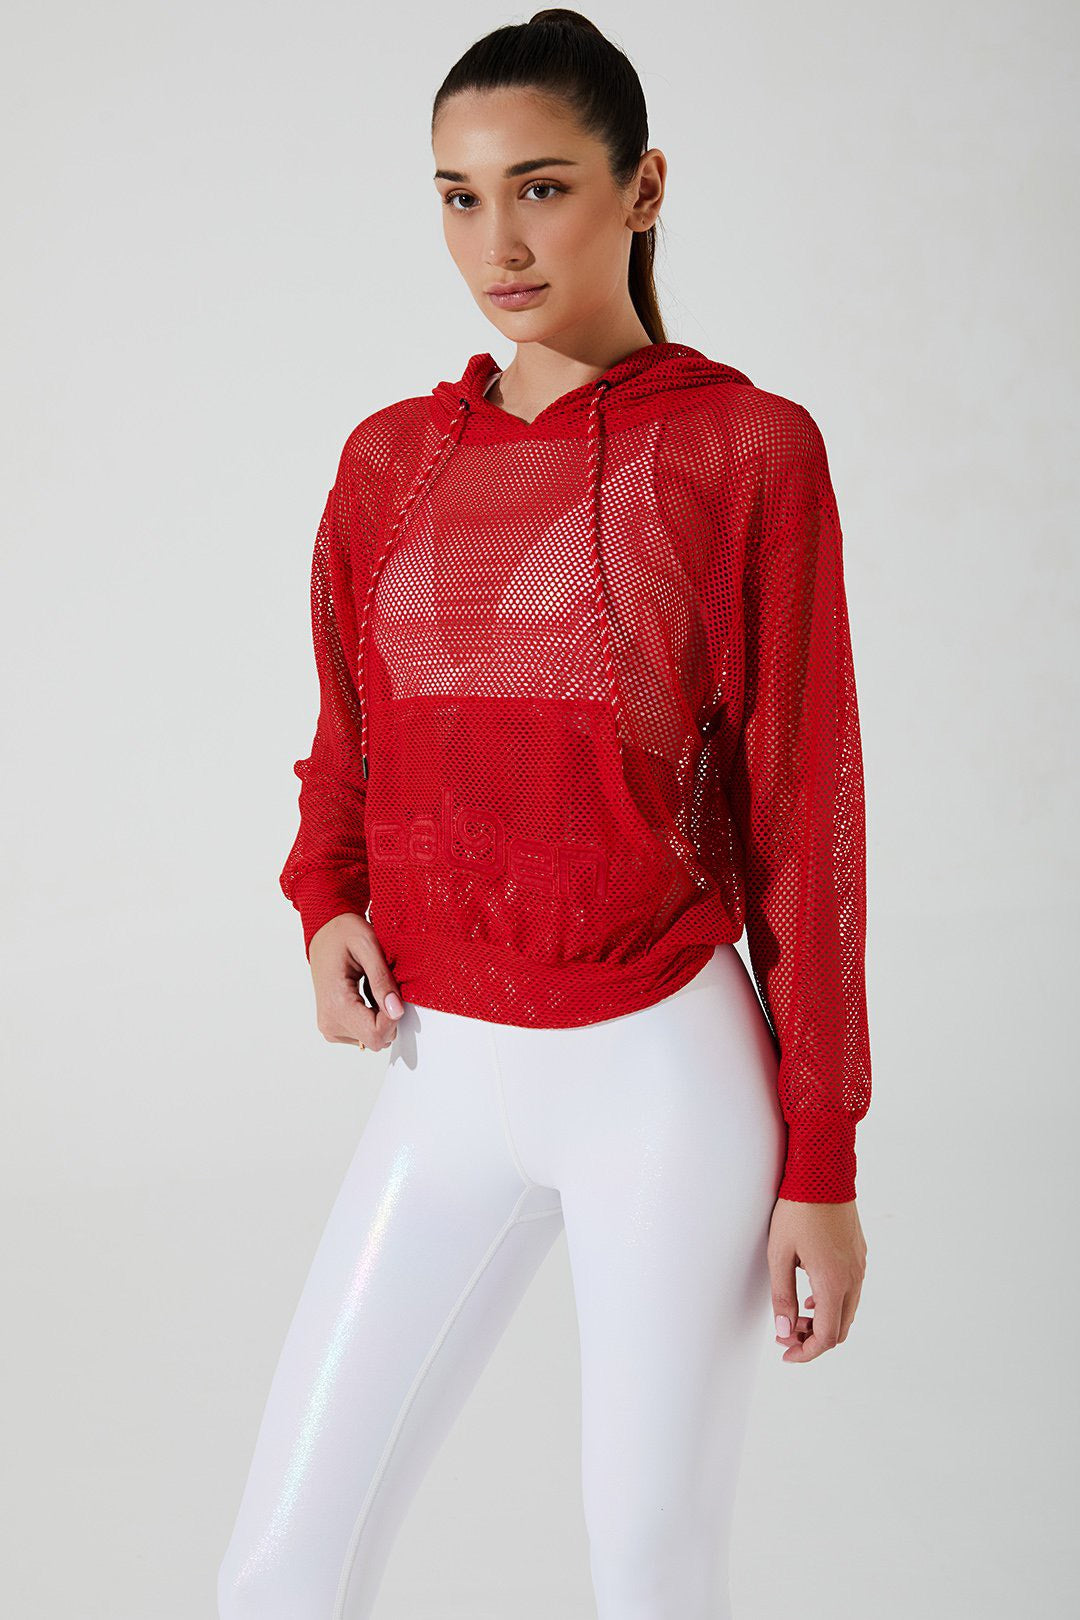 Stylish women's goji berry red hoodie with mesh design, perfect for casual wear.